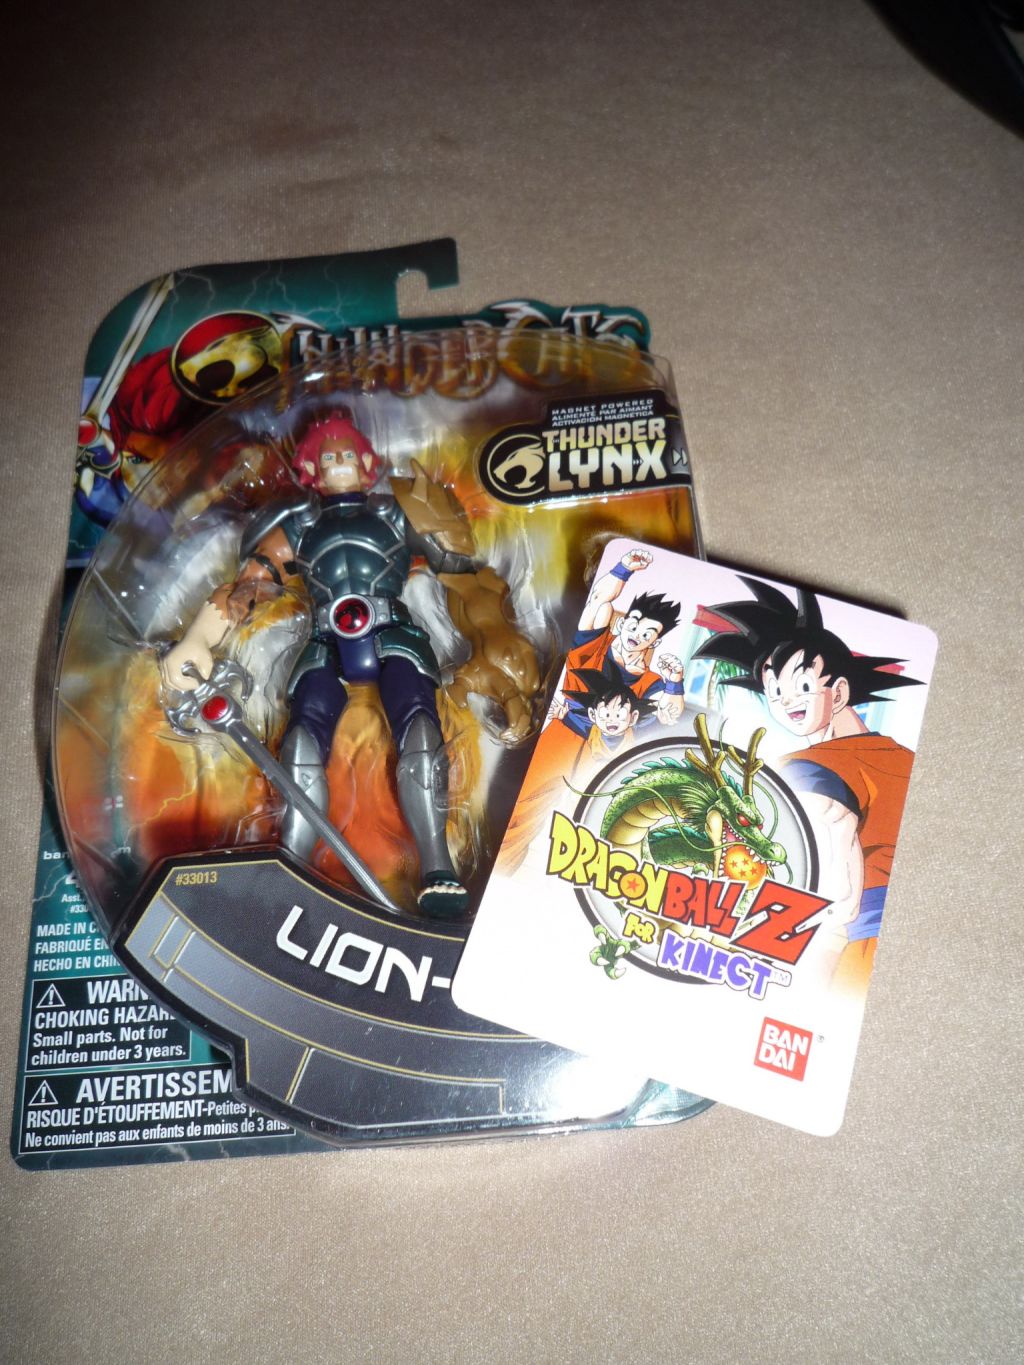 Dragon Ball Z Games For Ps3 2012